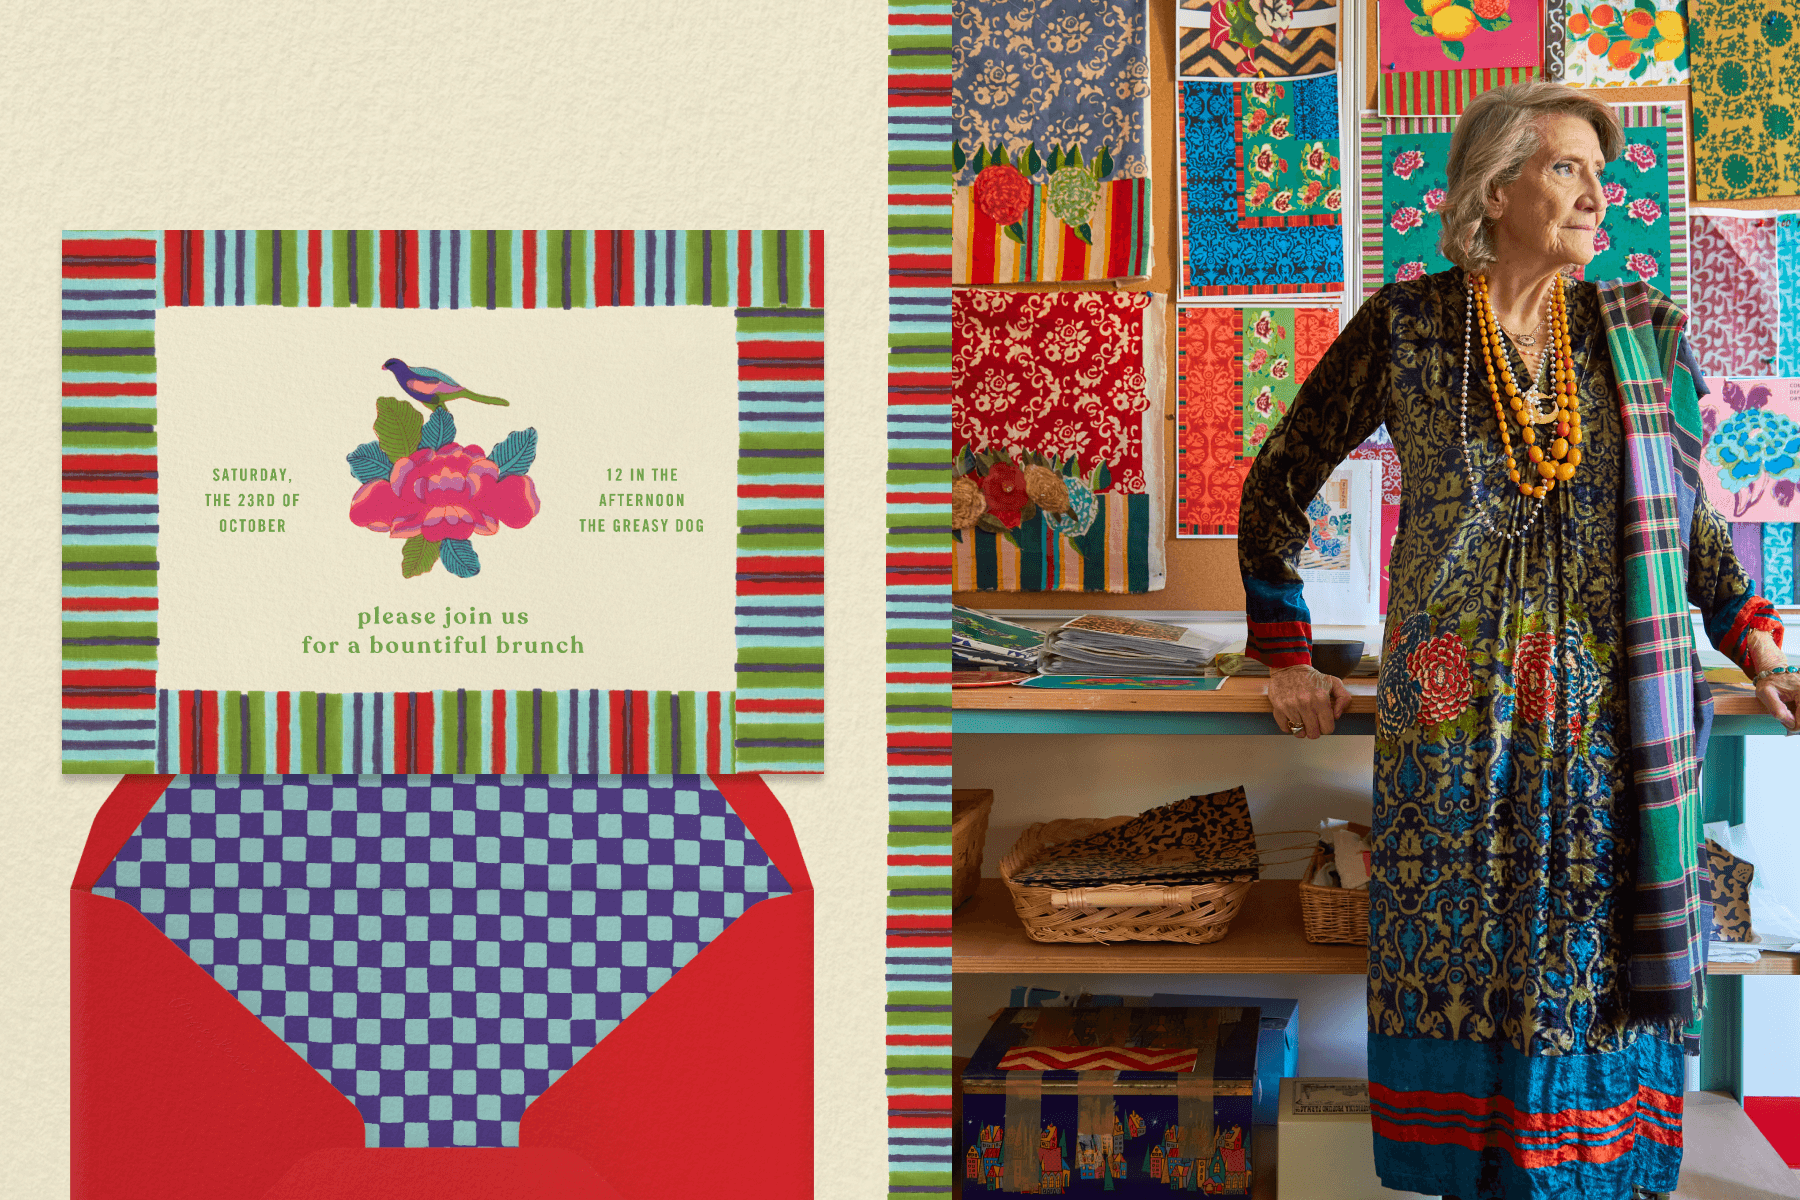 Left: Off-white invitation with a red, green and blue striped border and a pink floral illustration in the center. Right: Textile designer Lisa Corti poses in front of a wall of vibrant fabrics of her own design. 